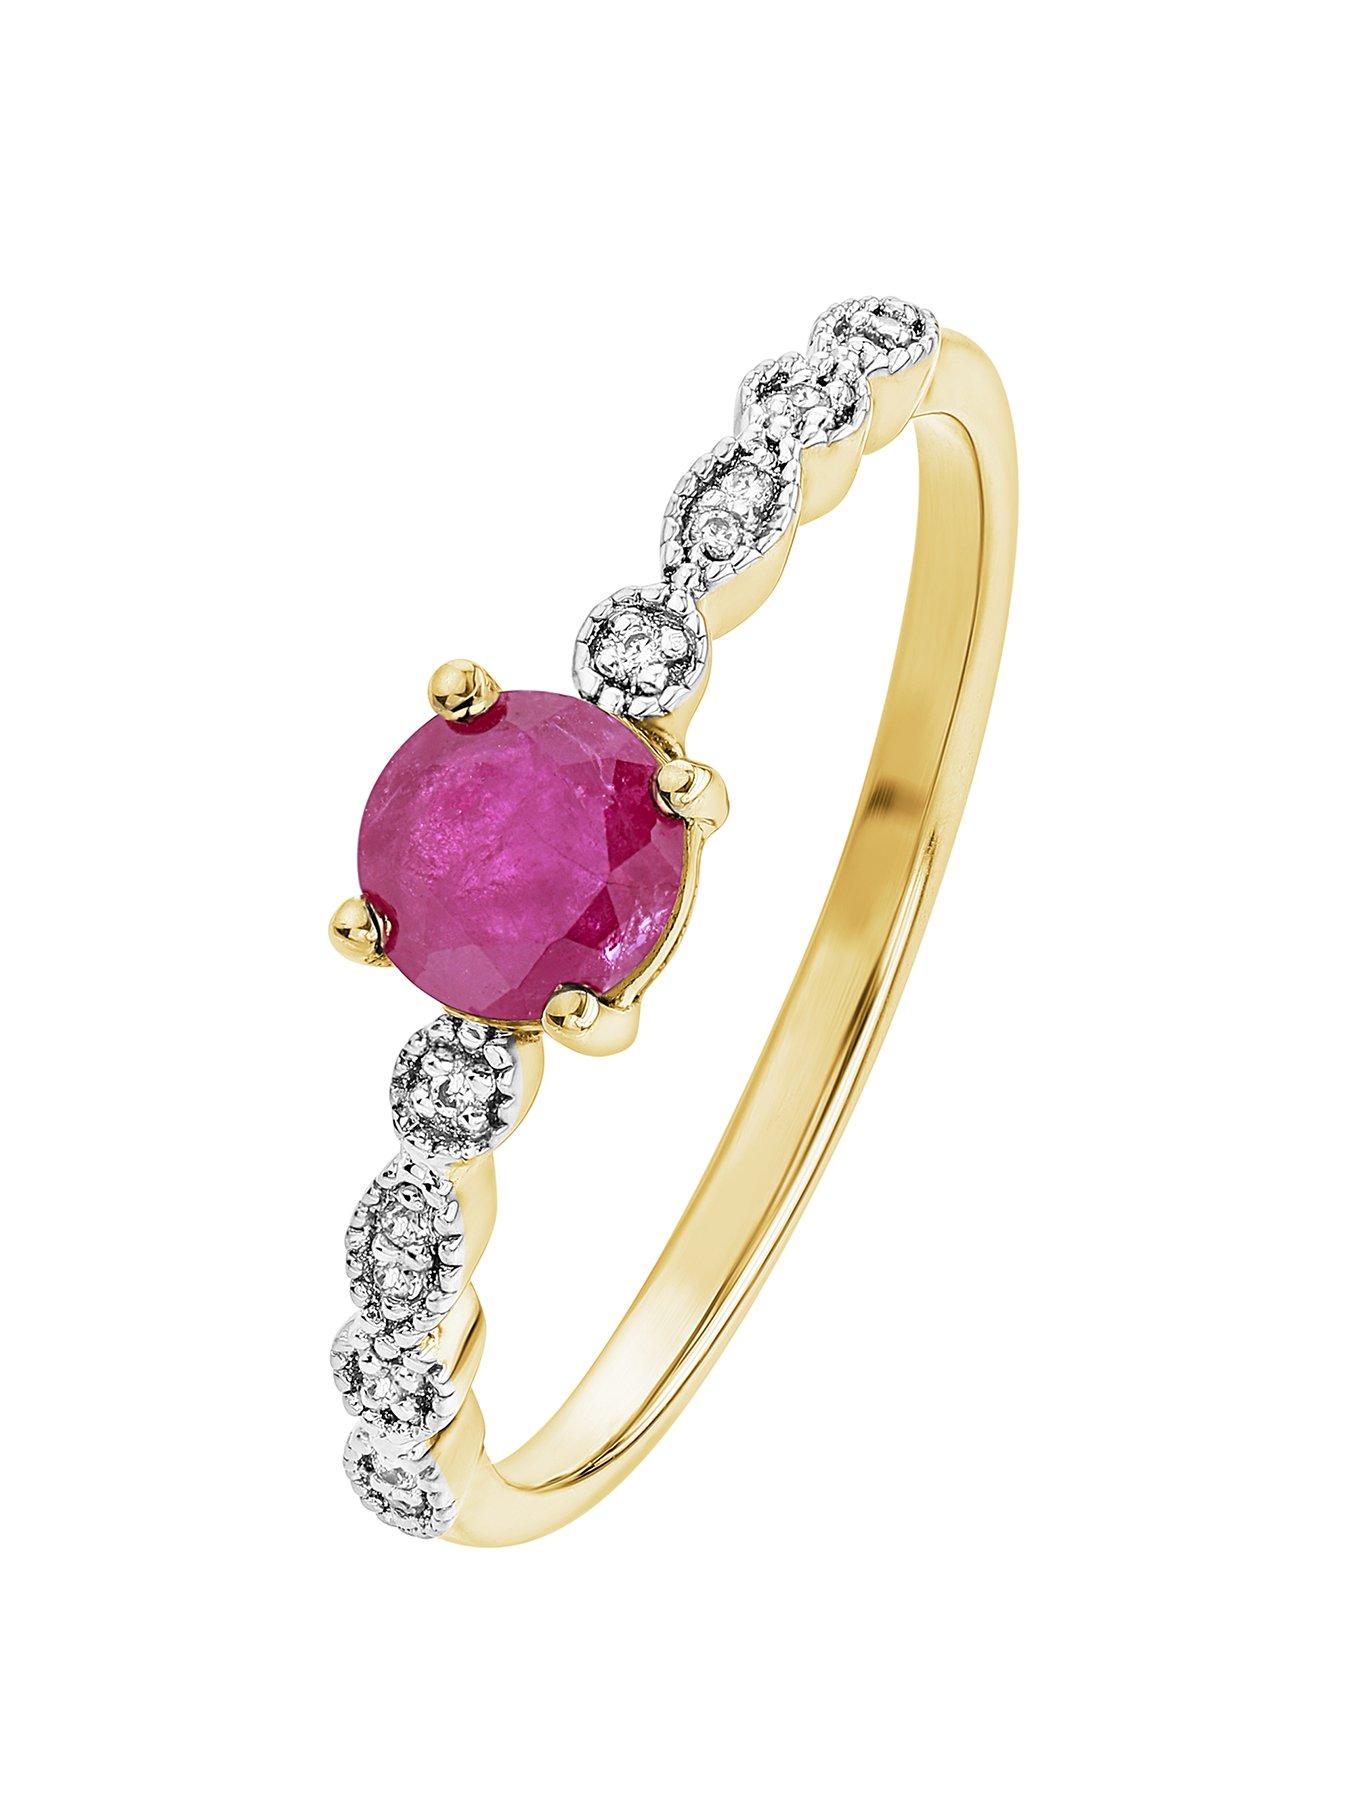  Arrosa 9ct Yellow Gold 5mm Ruby and Diamond Ring